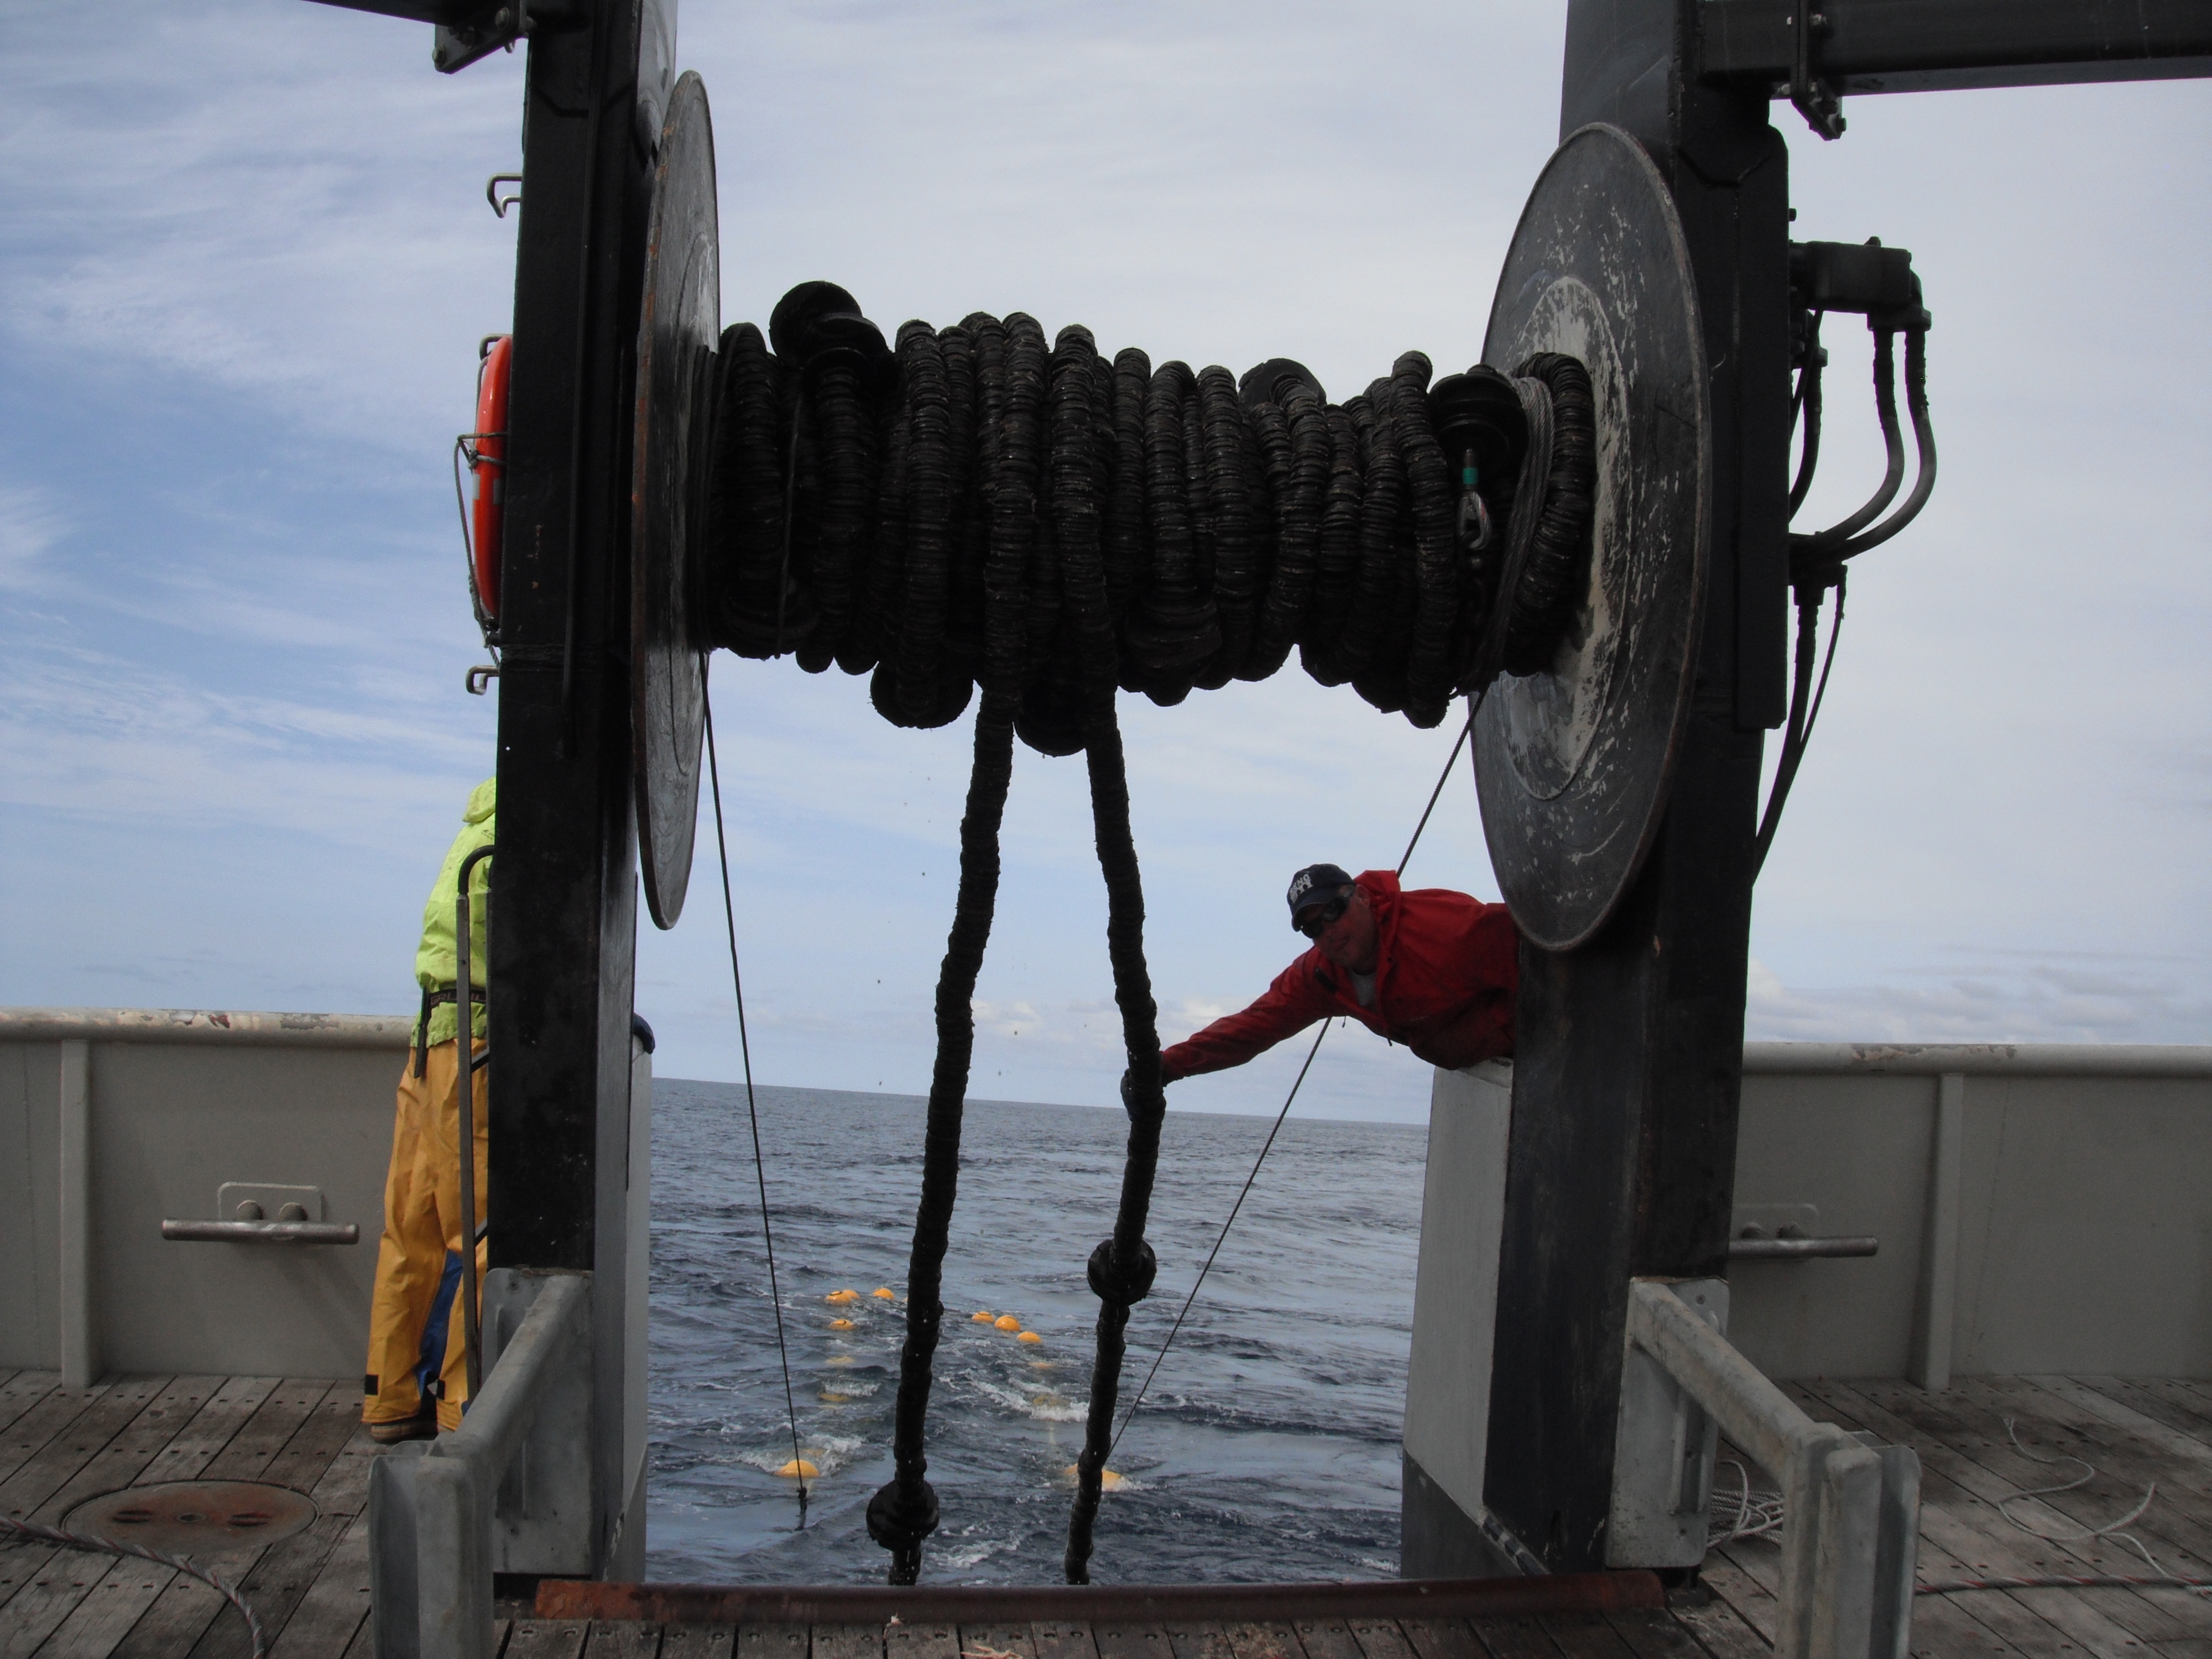 Hauling the catch back up. Old tires were used to make up the 'cookies' used to for the trawl net